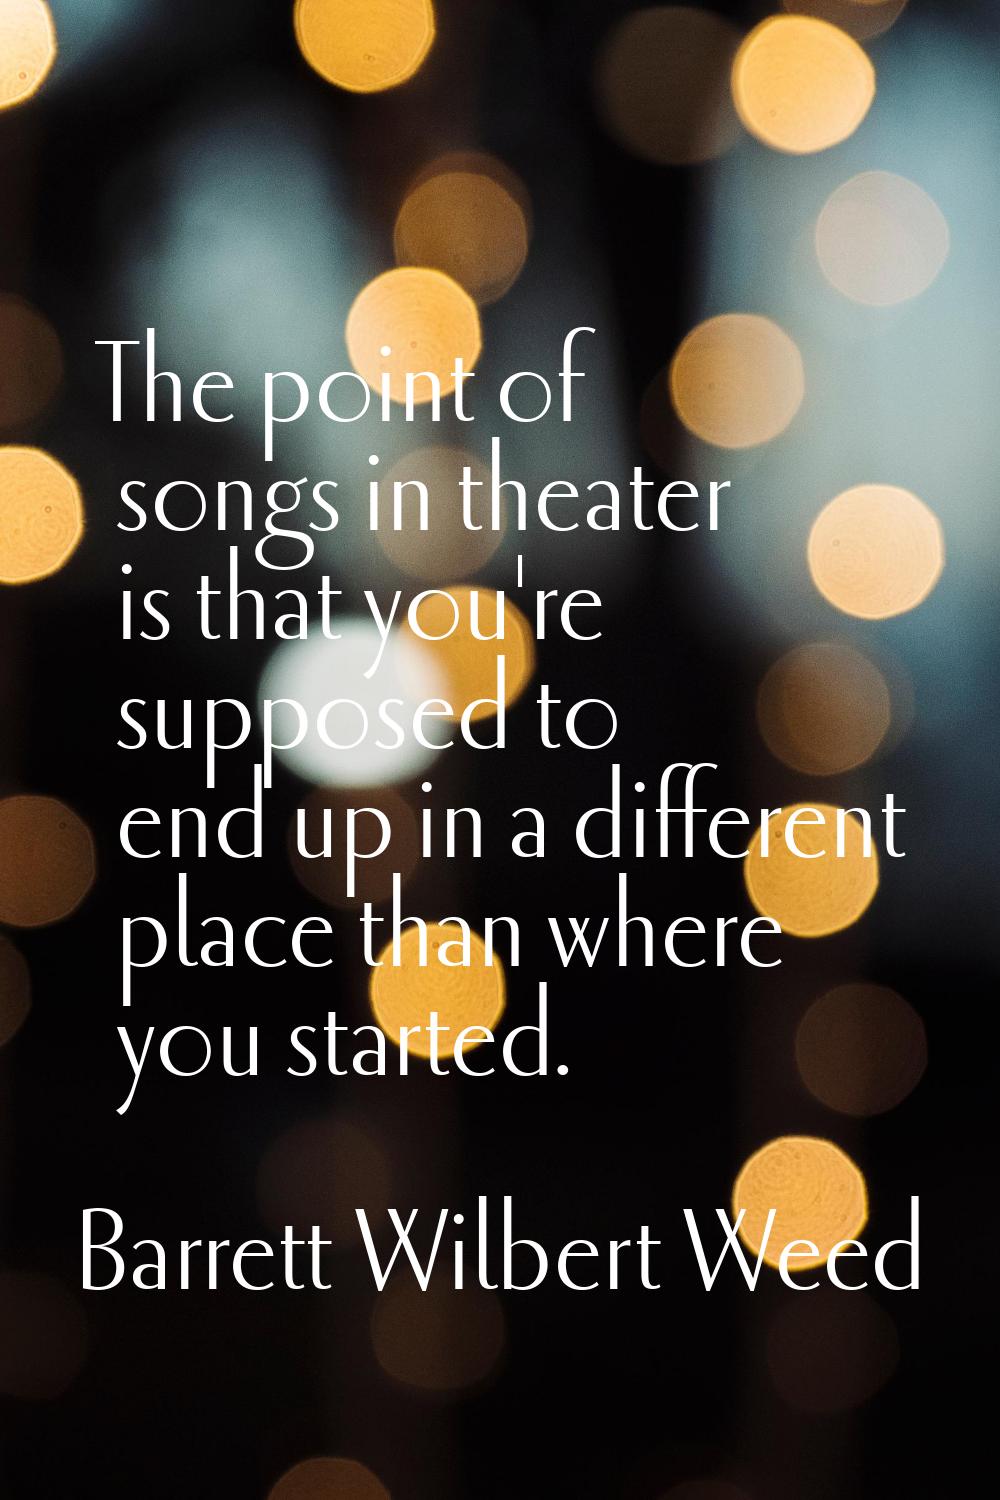 The point of songs in theater is that you're supposed to end up in a different place than where you